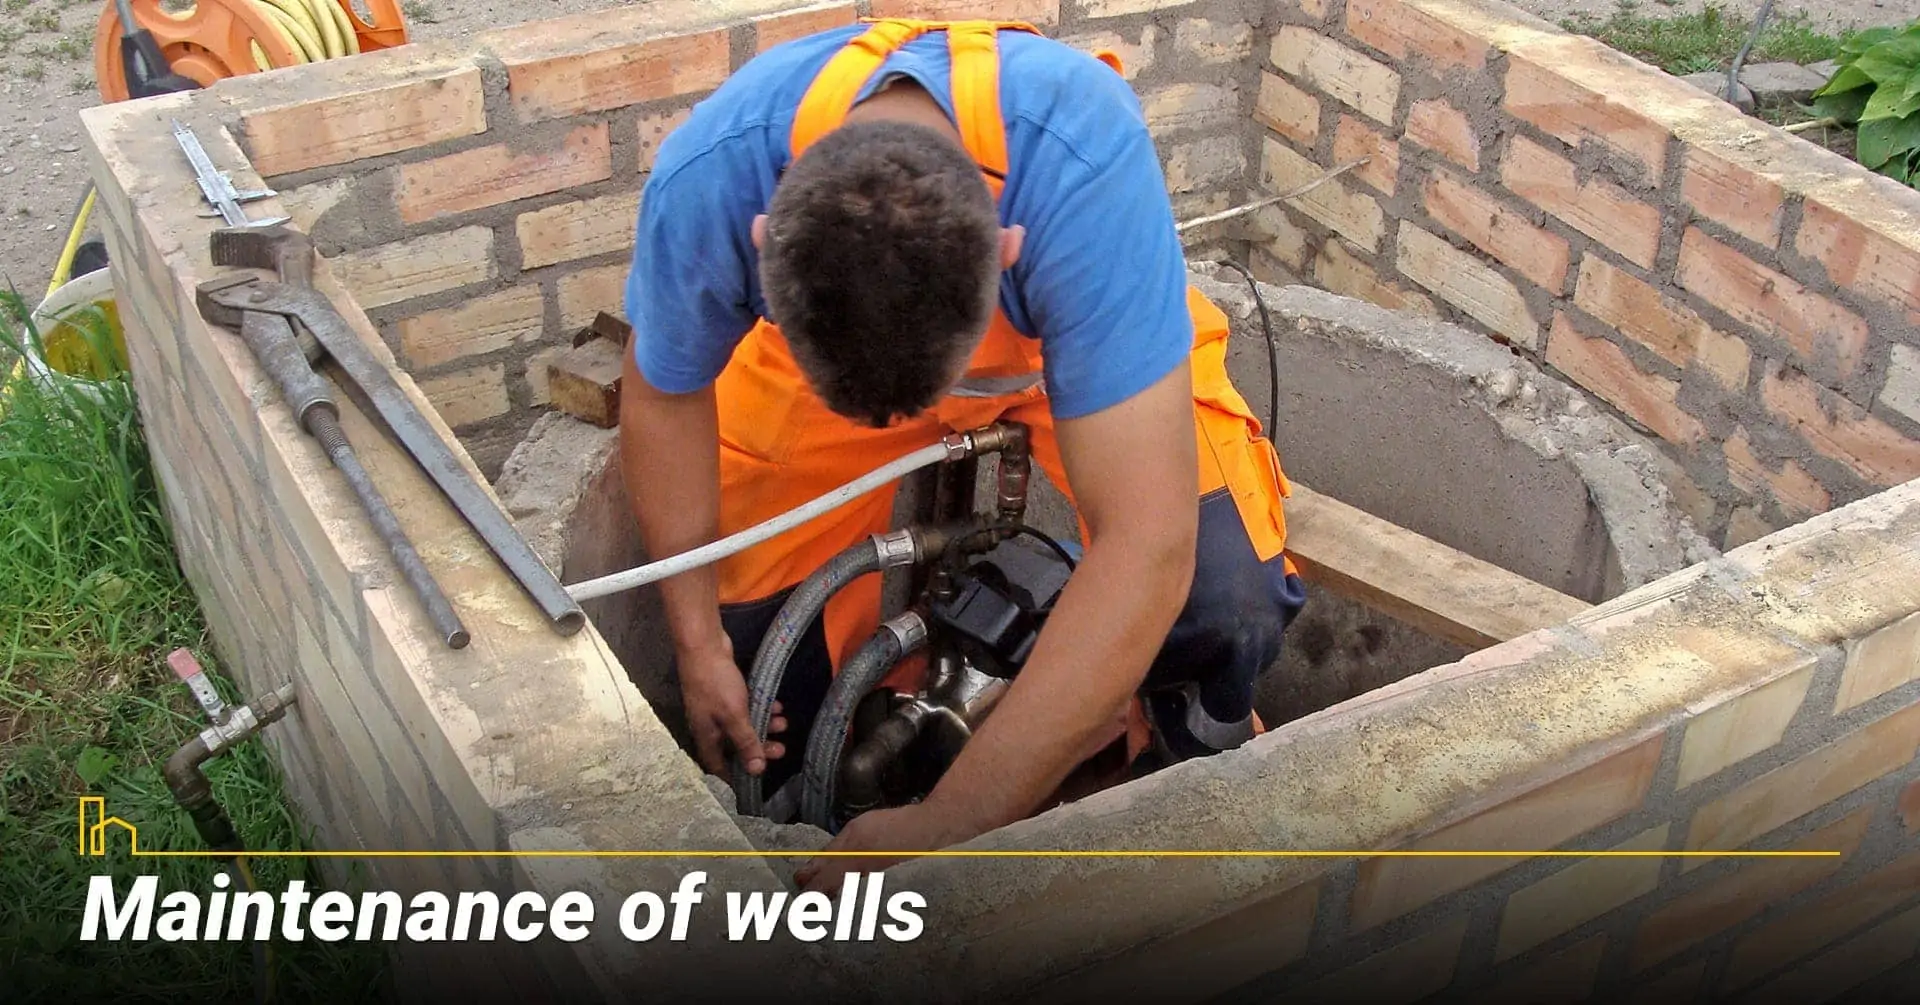 Maintenance of wells, keep wells in operation